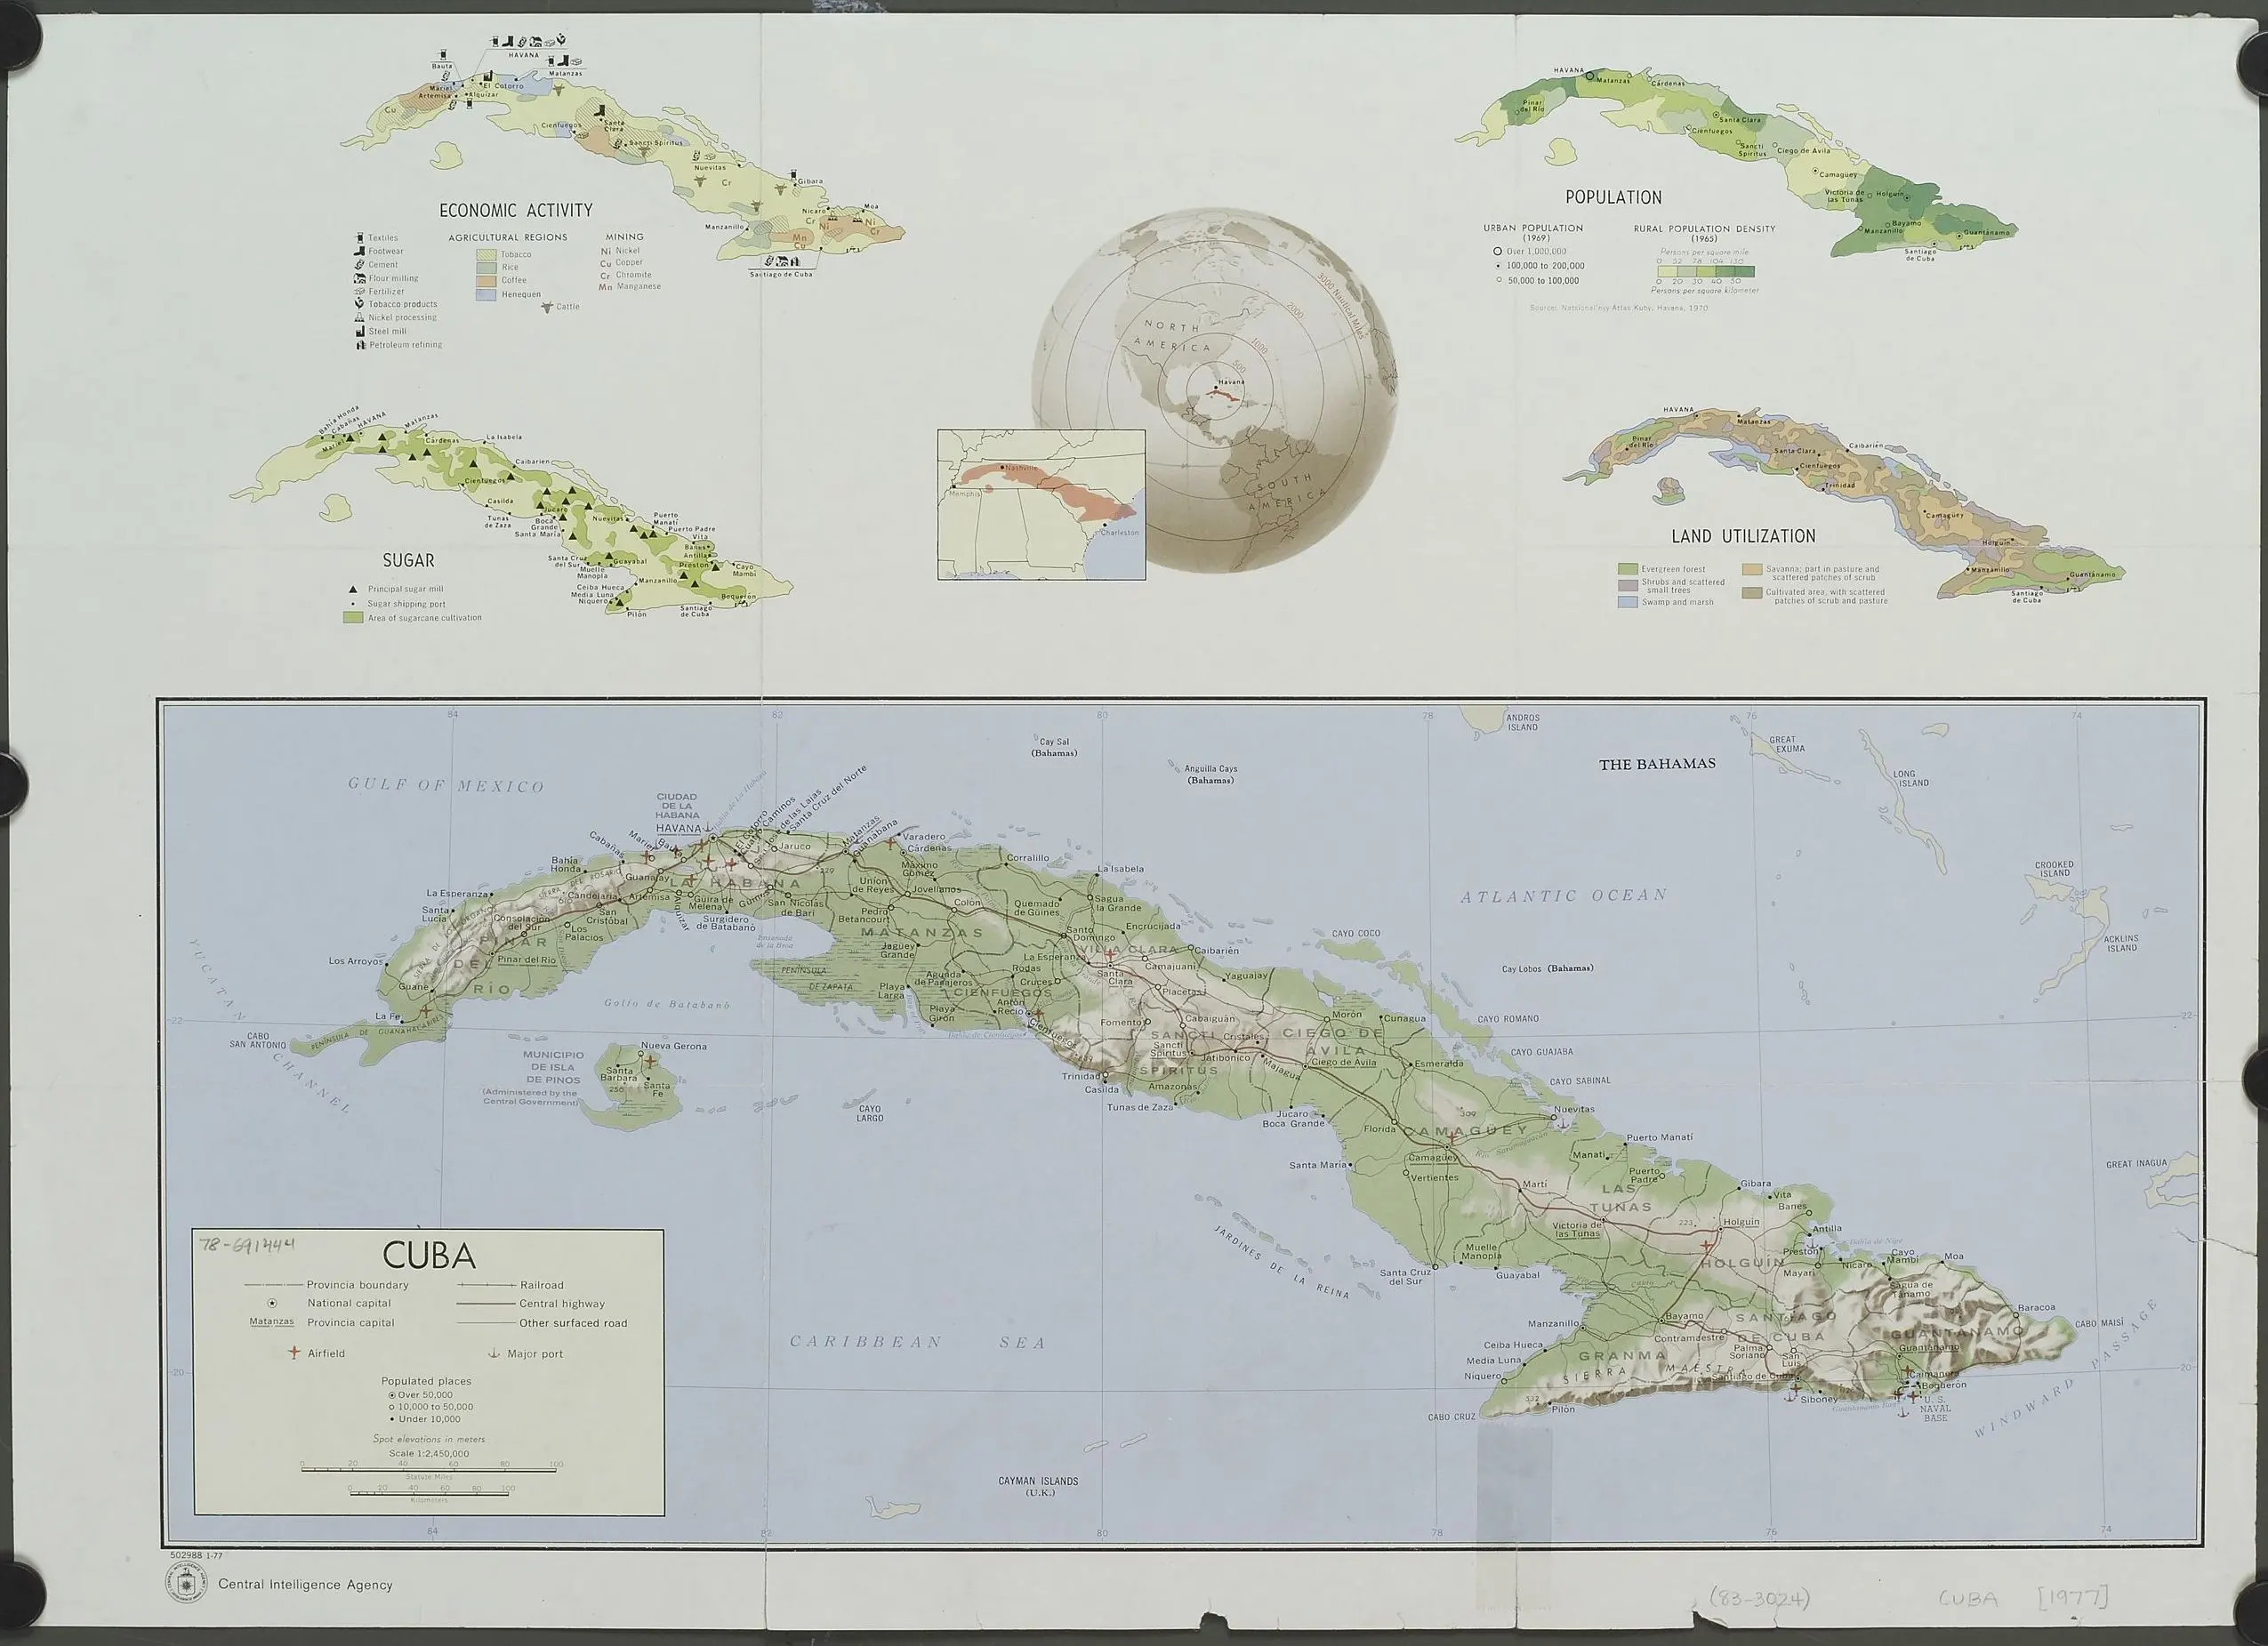 Cold War-era map of Cuba, United States Central Intelligence Agency. Source: New York Public Library.